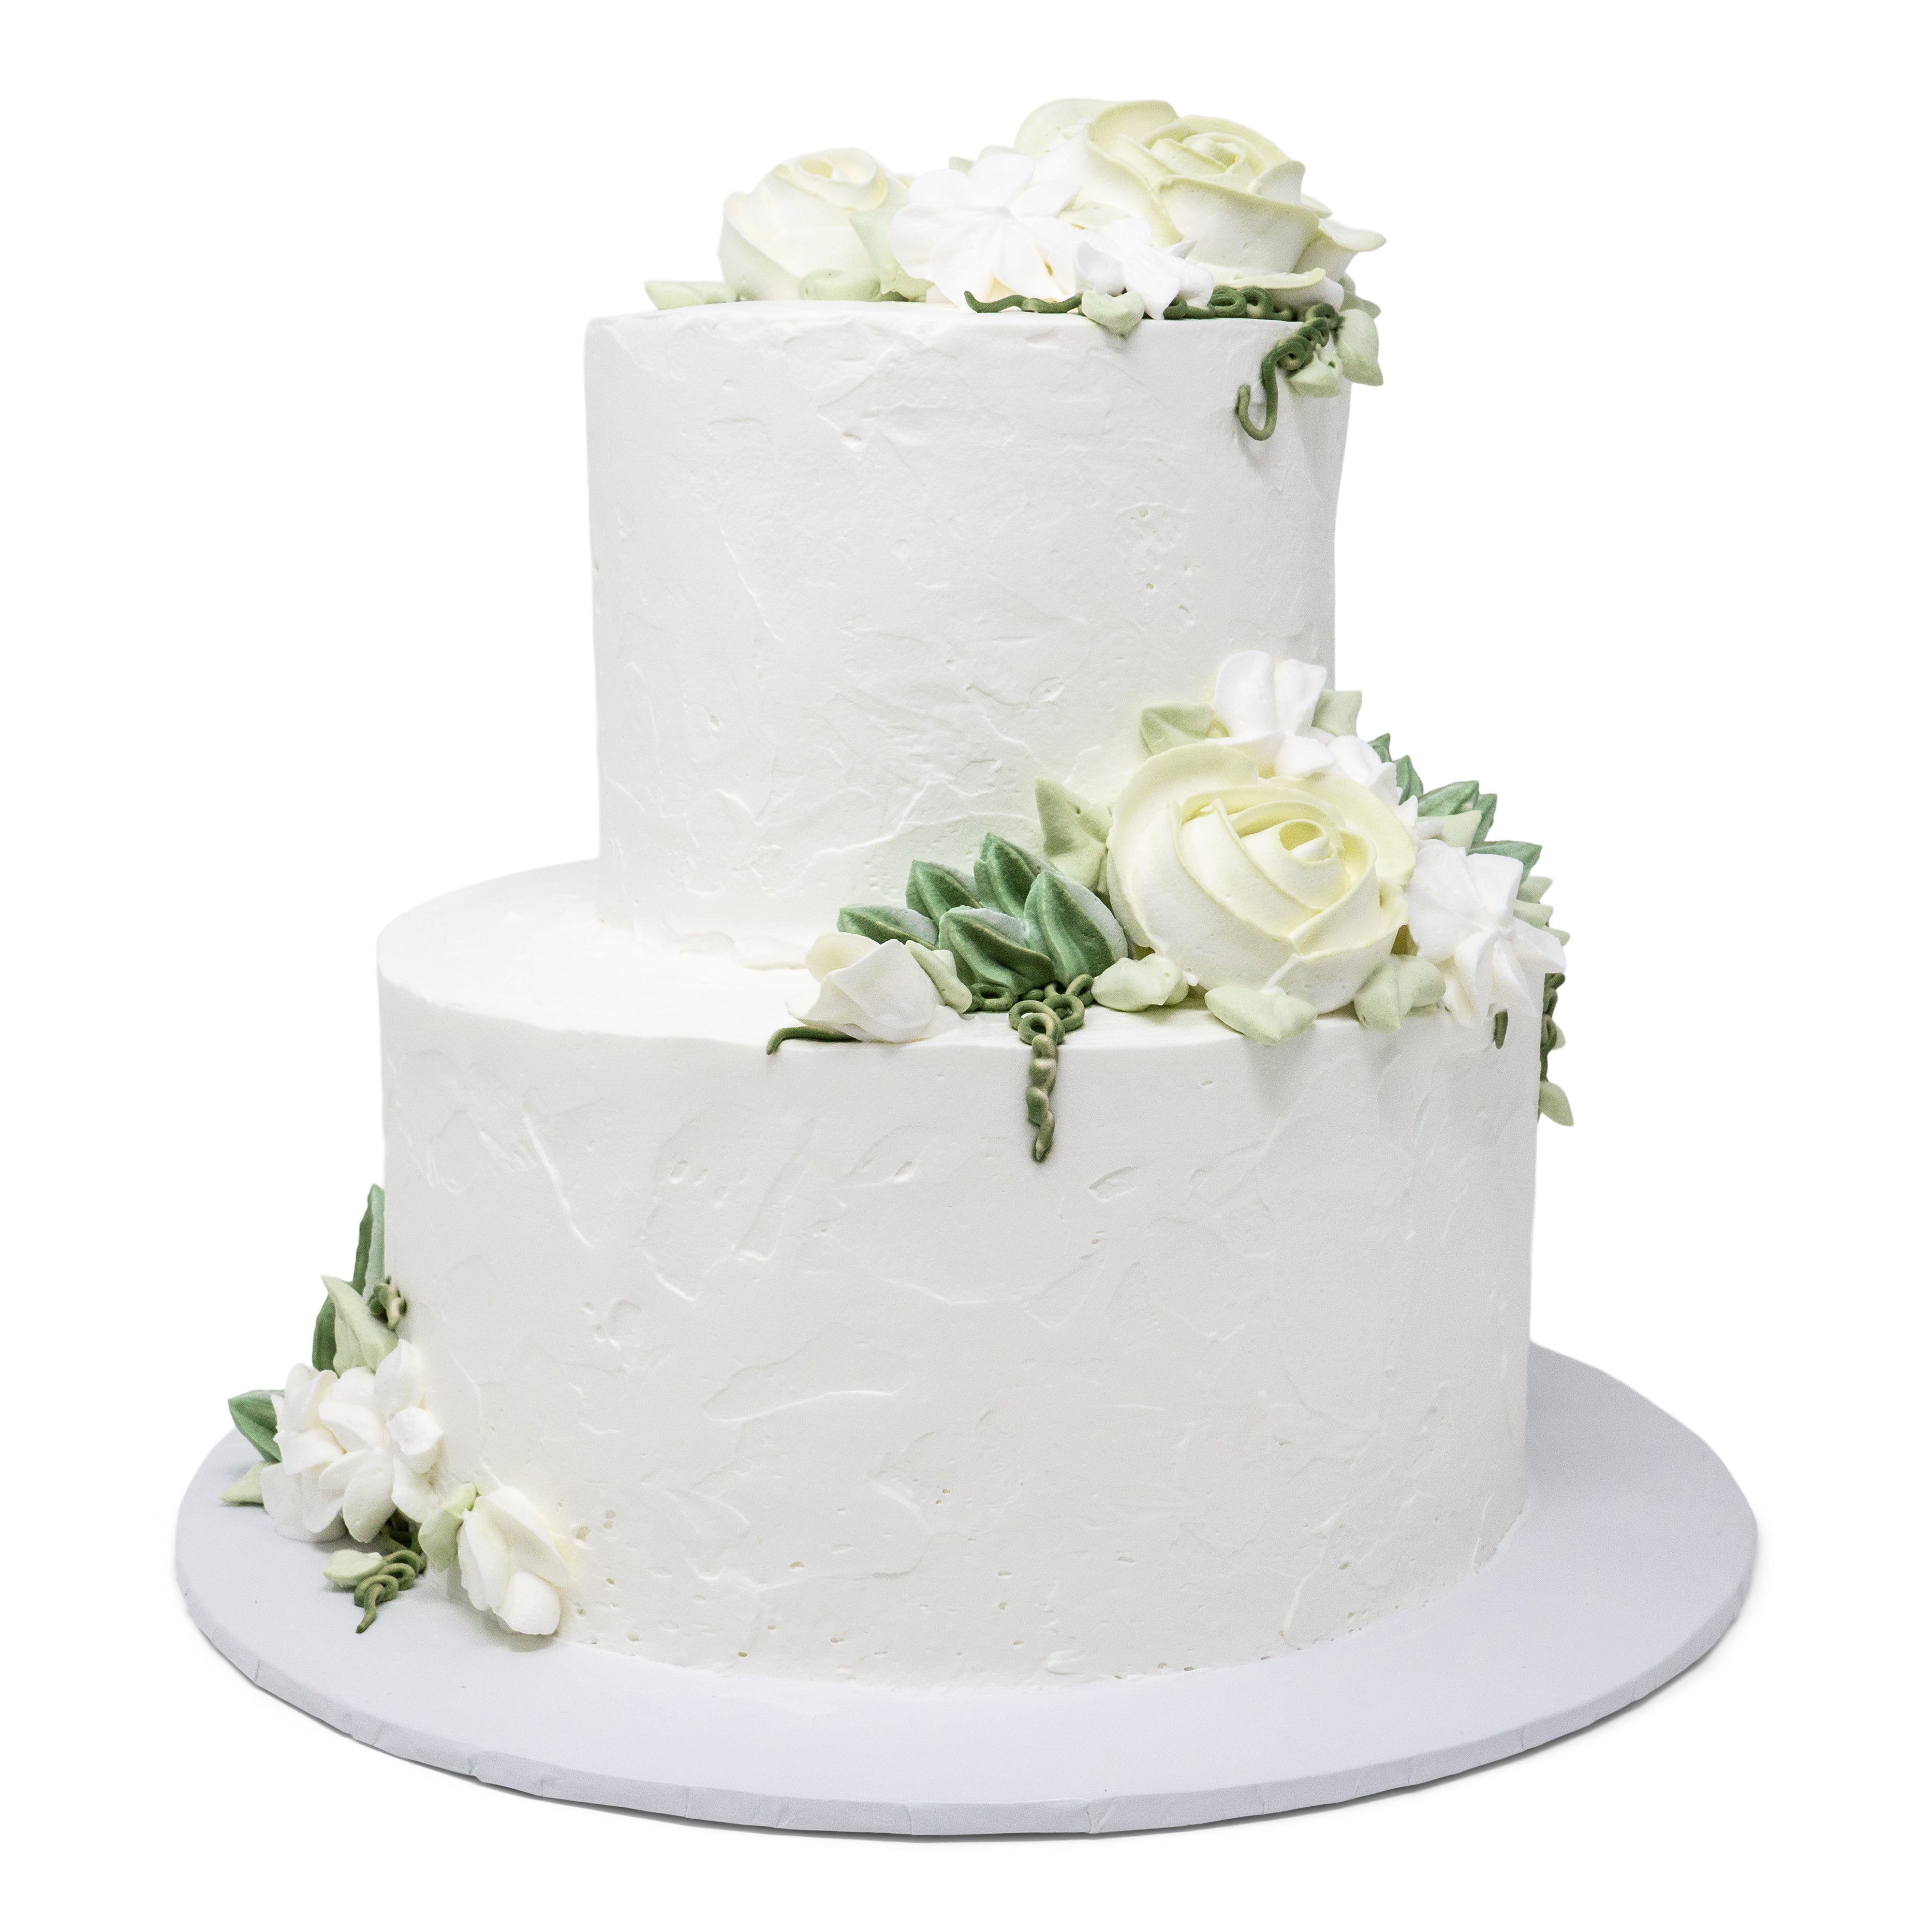 2 Tier Cake with Intricate Swirl Design – Patty's Cakes and Desserts